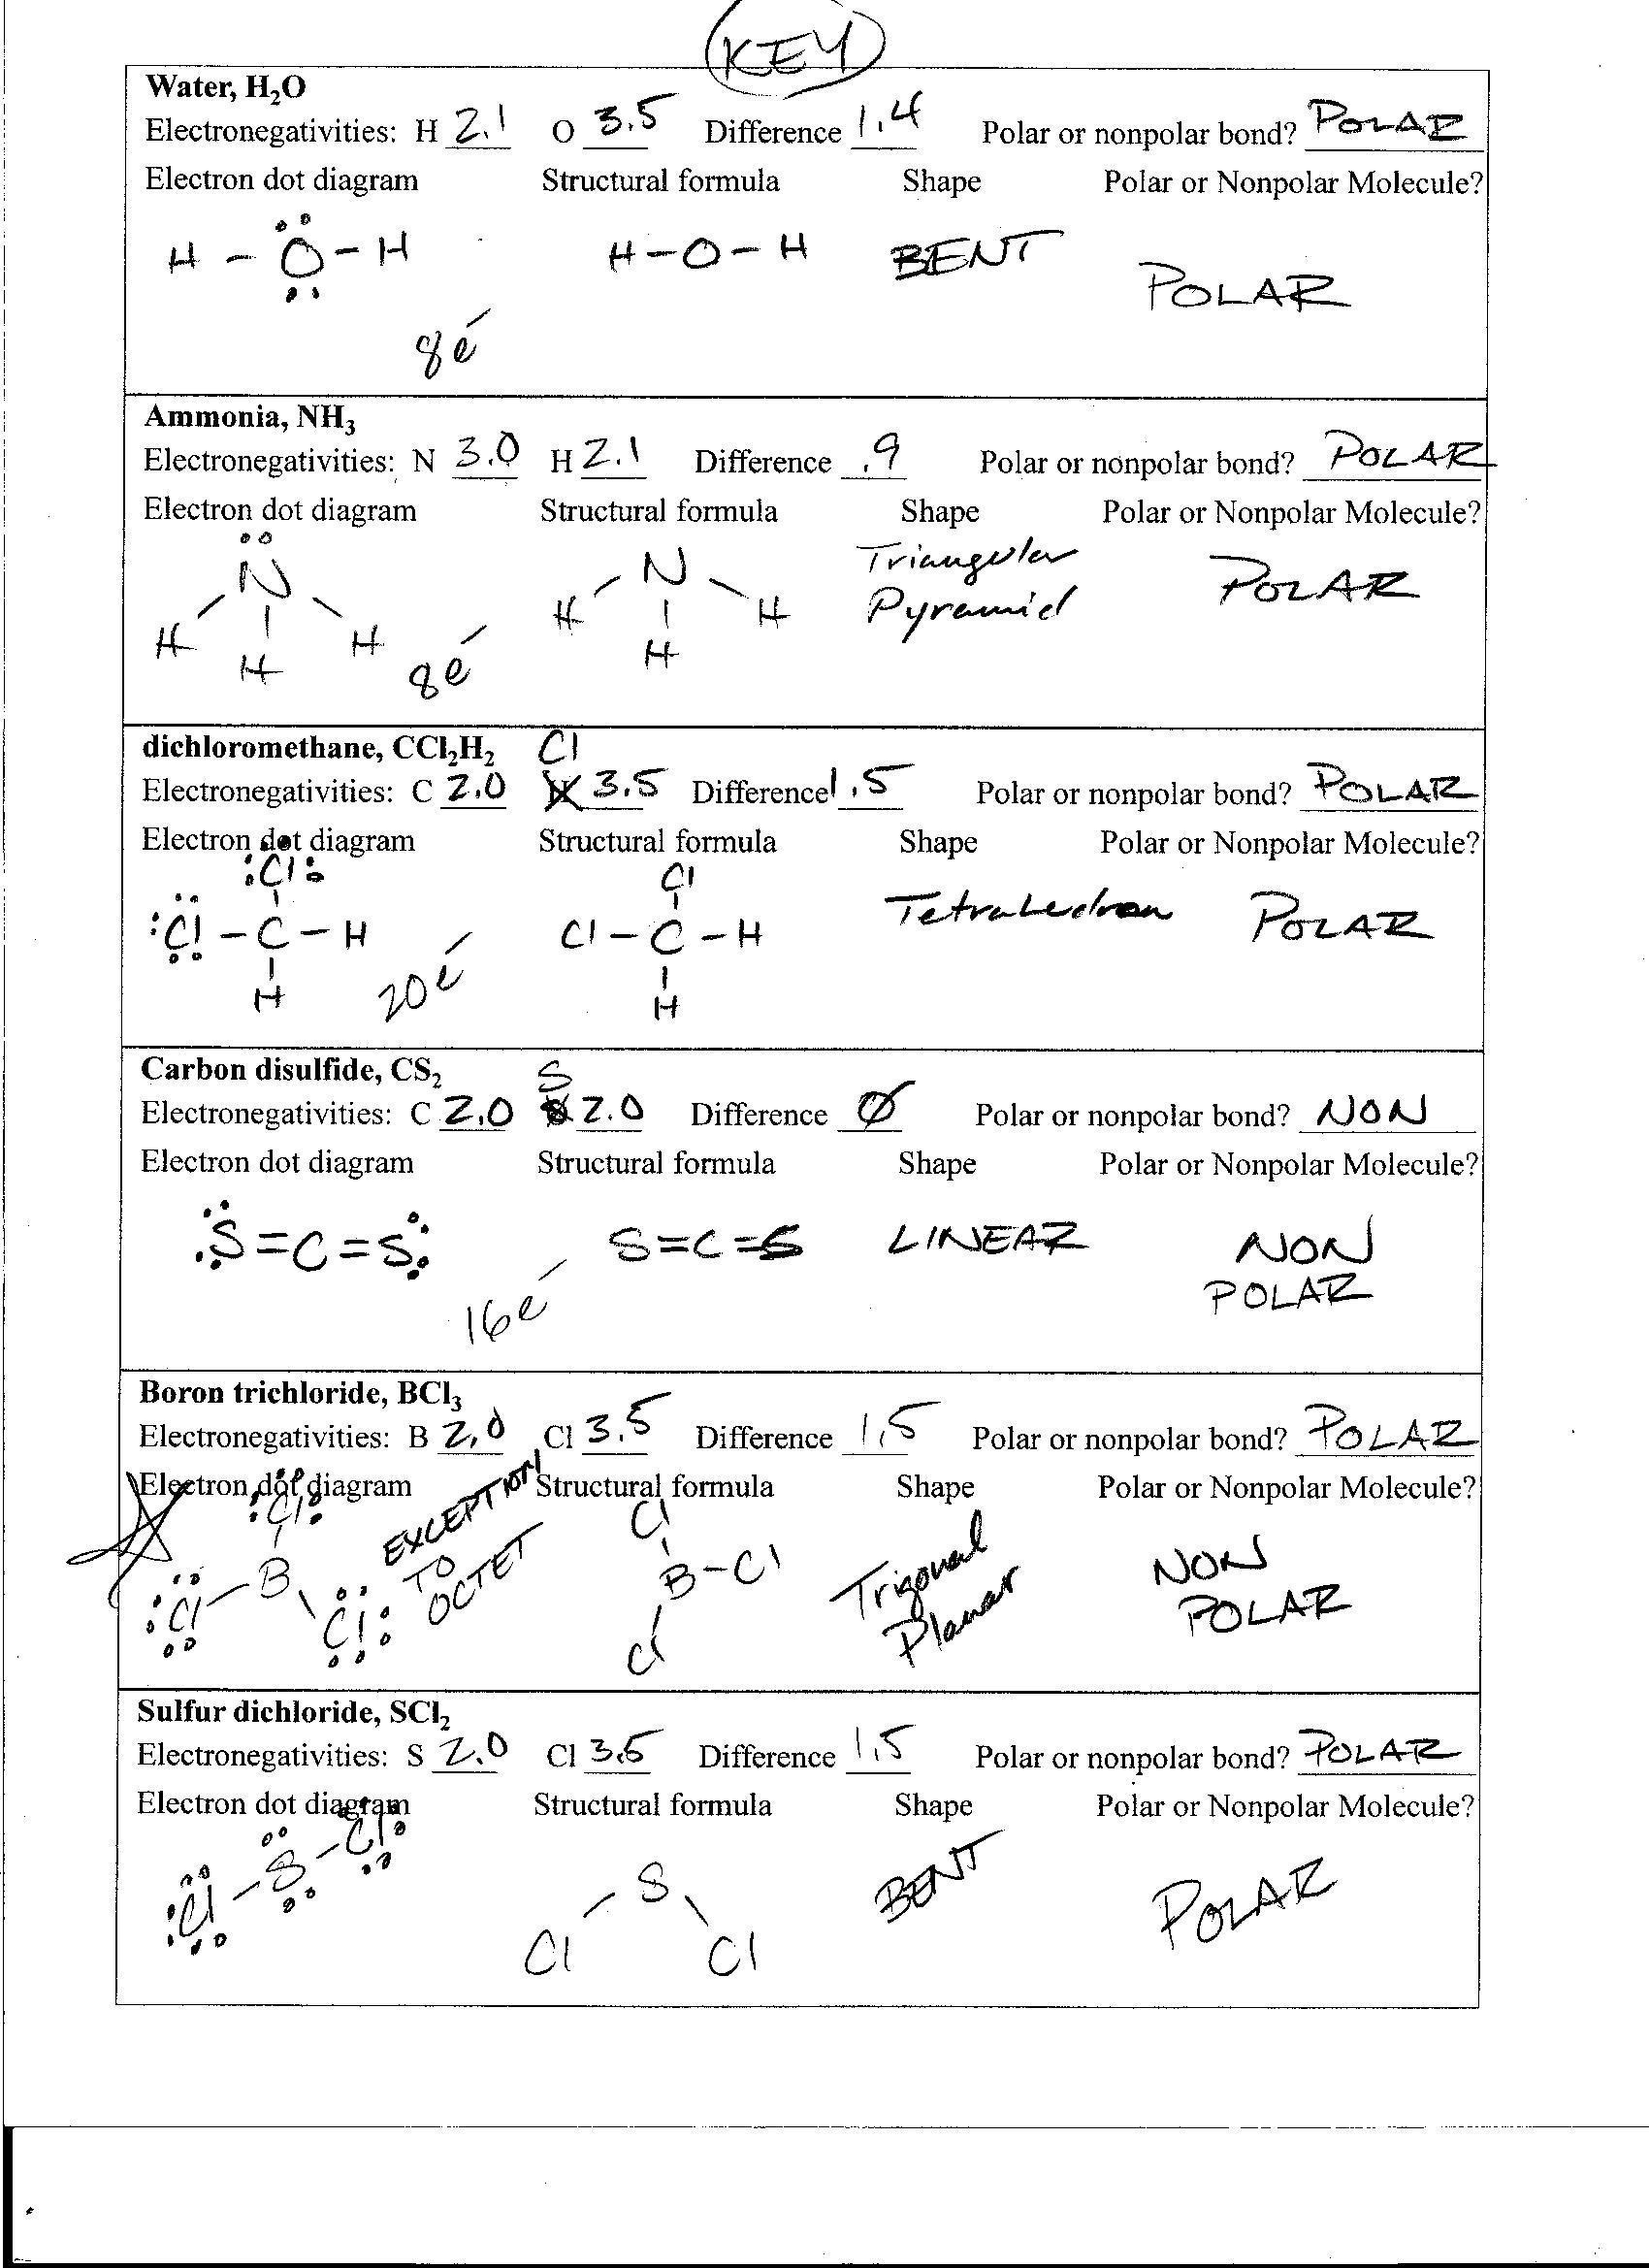 Worksheet Polarity Of Bonds Answers Foothill High School